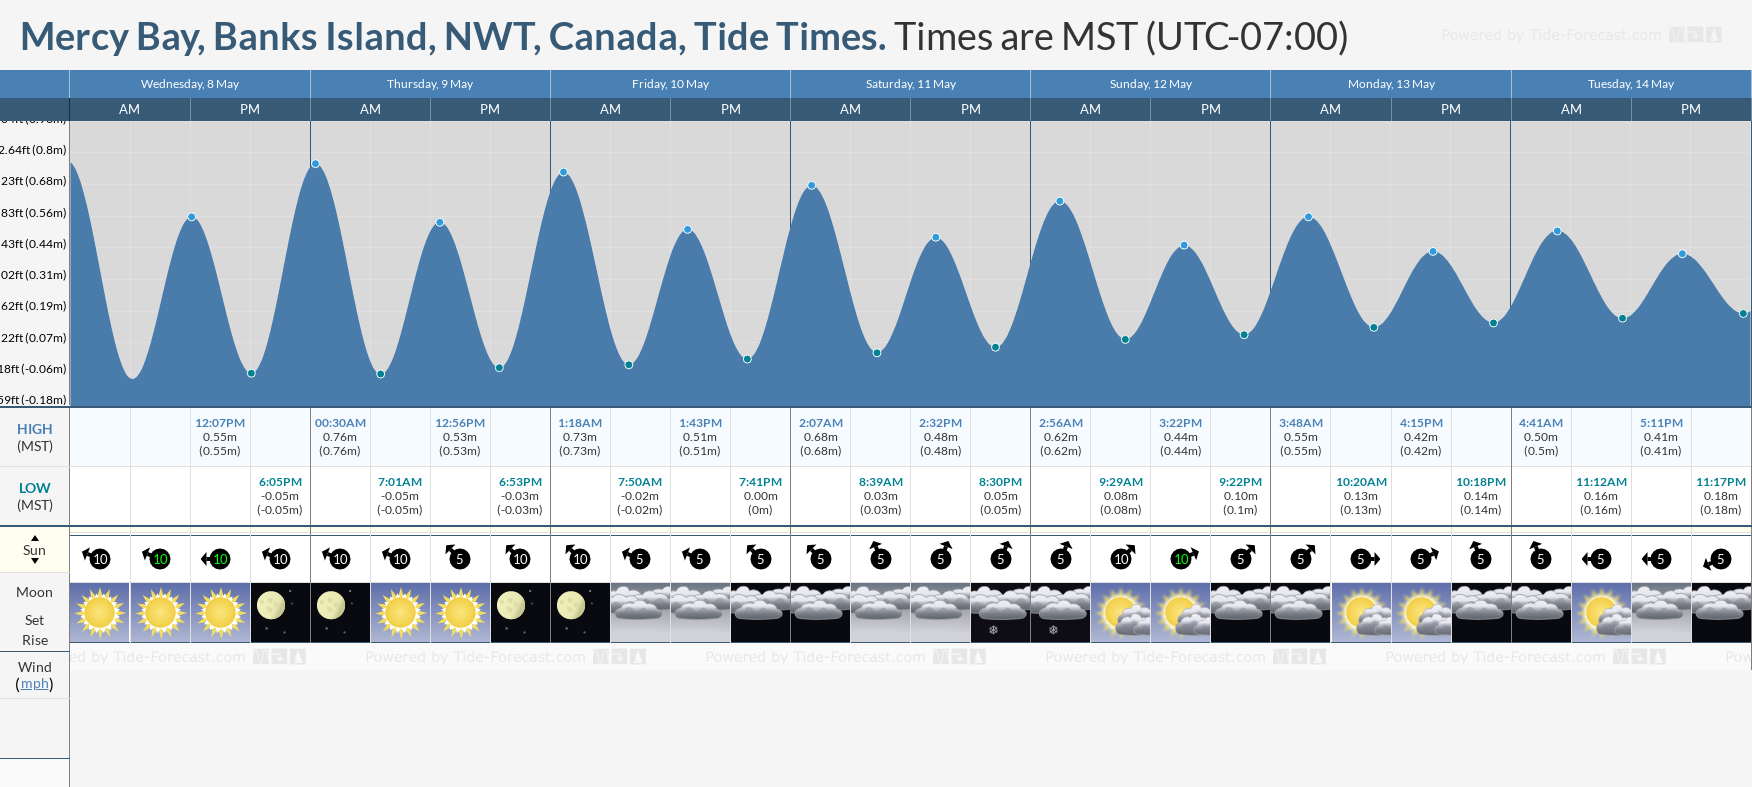 Mercy Bay, Banks Island, NWT, Canada Tide Chart including high and low tide tide times for the next 7 days